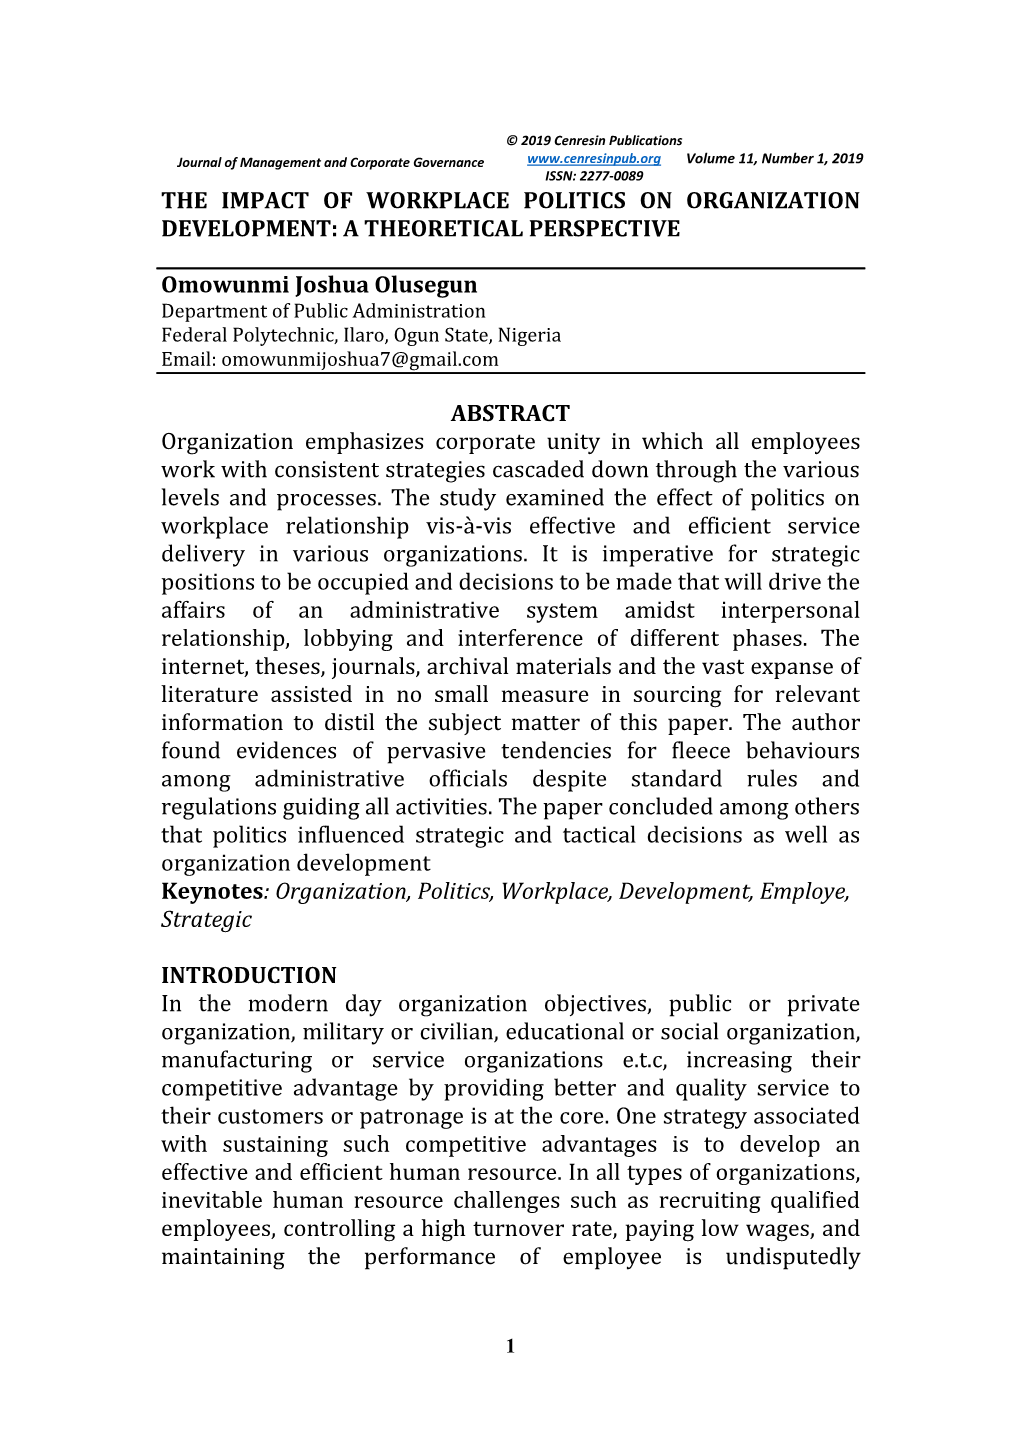 The Impact of Workplace Politics on Organization Development: a Theoretical Perspective